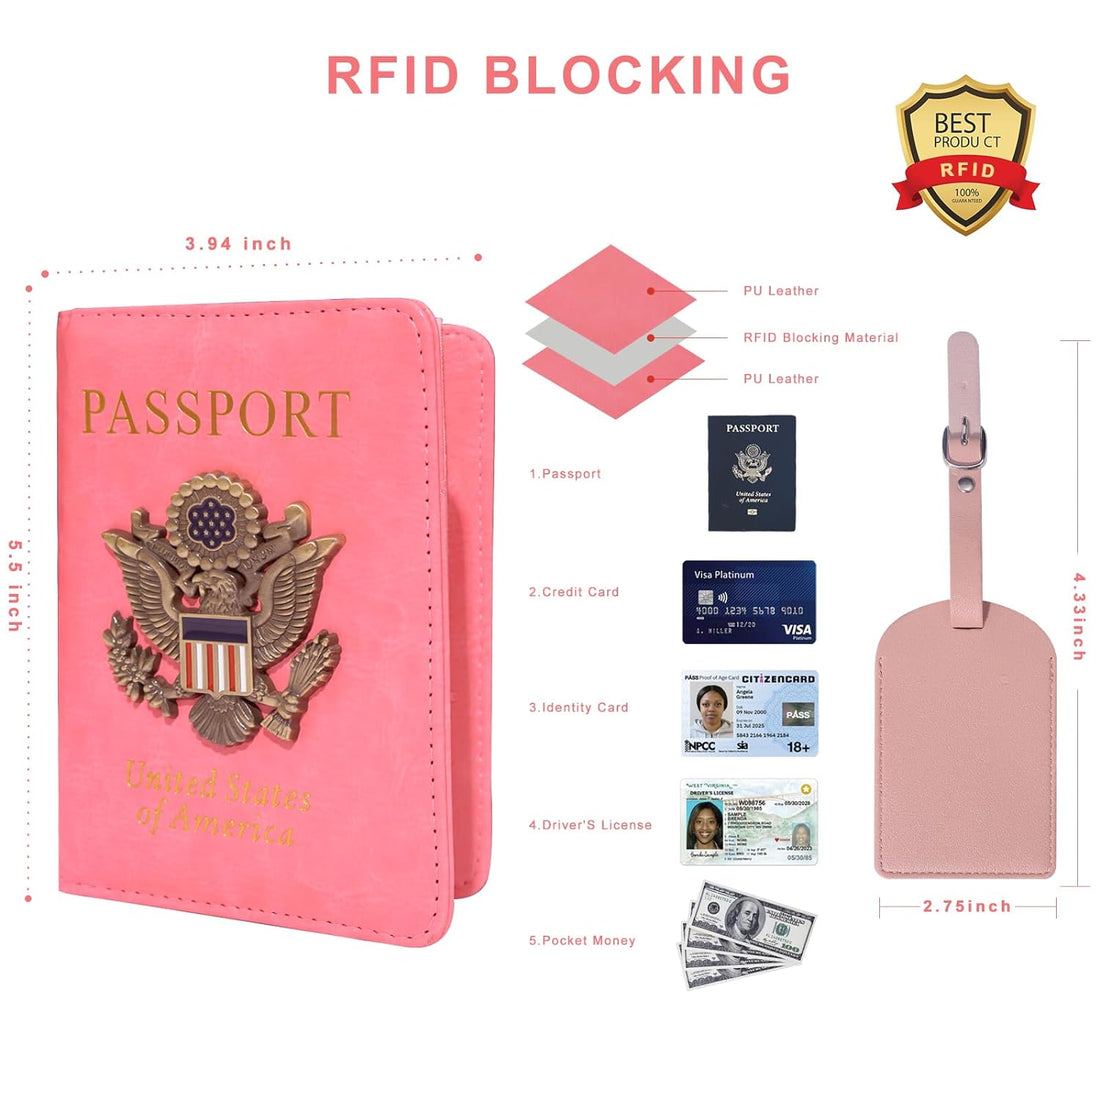 Passport Holder Cover Case with Airtag, Travel Passport Book Wallet and Vaccine Card Holder Combo, US ID Badge Porta Pasaporte with RFID Blocking, Leather Document Organizer for Men Women Kids, Pink, Polished Leather Surfaces